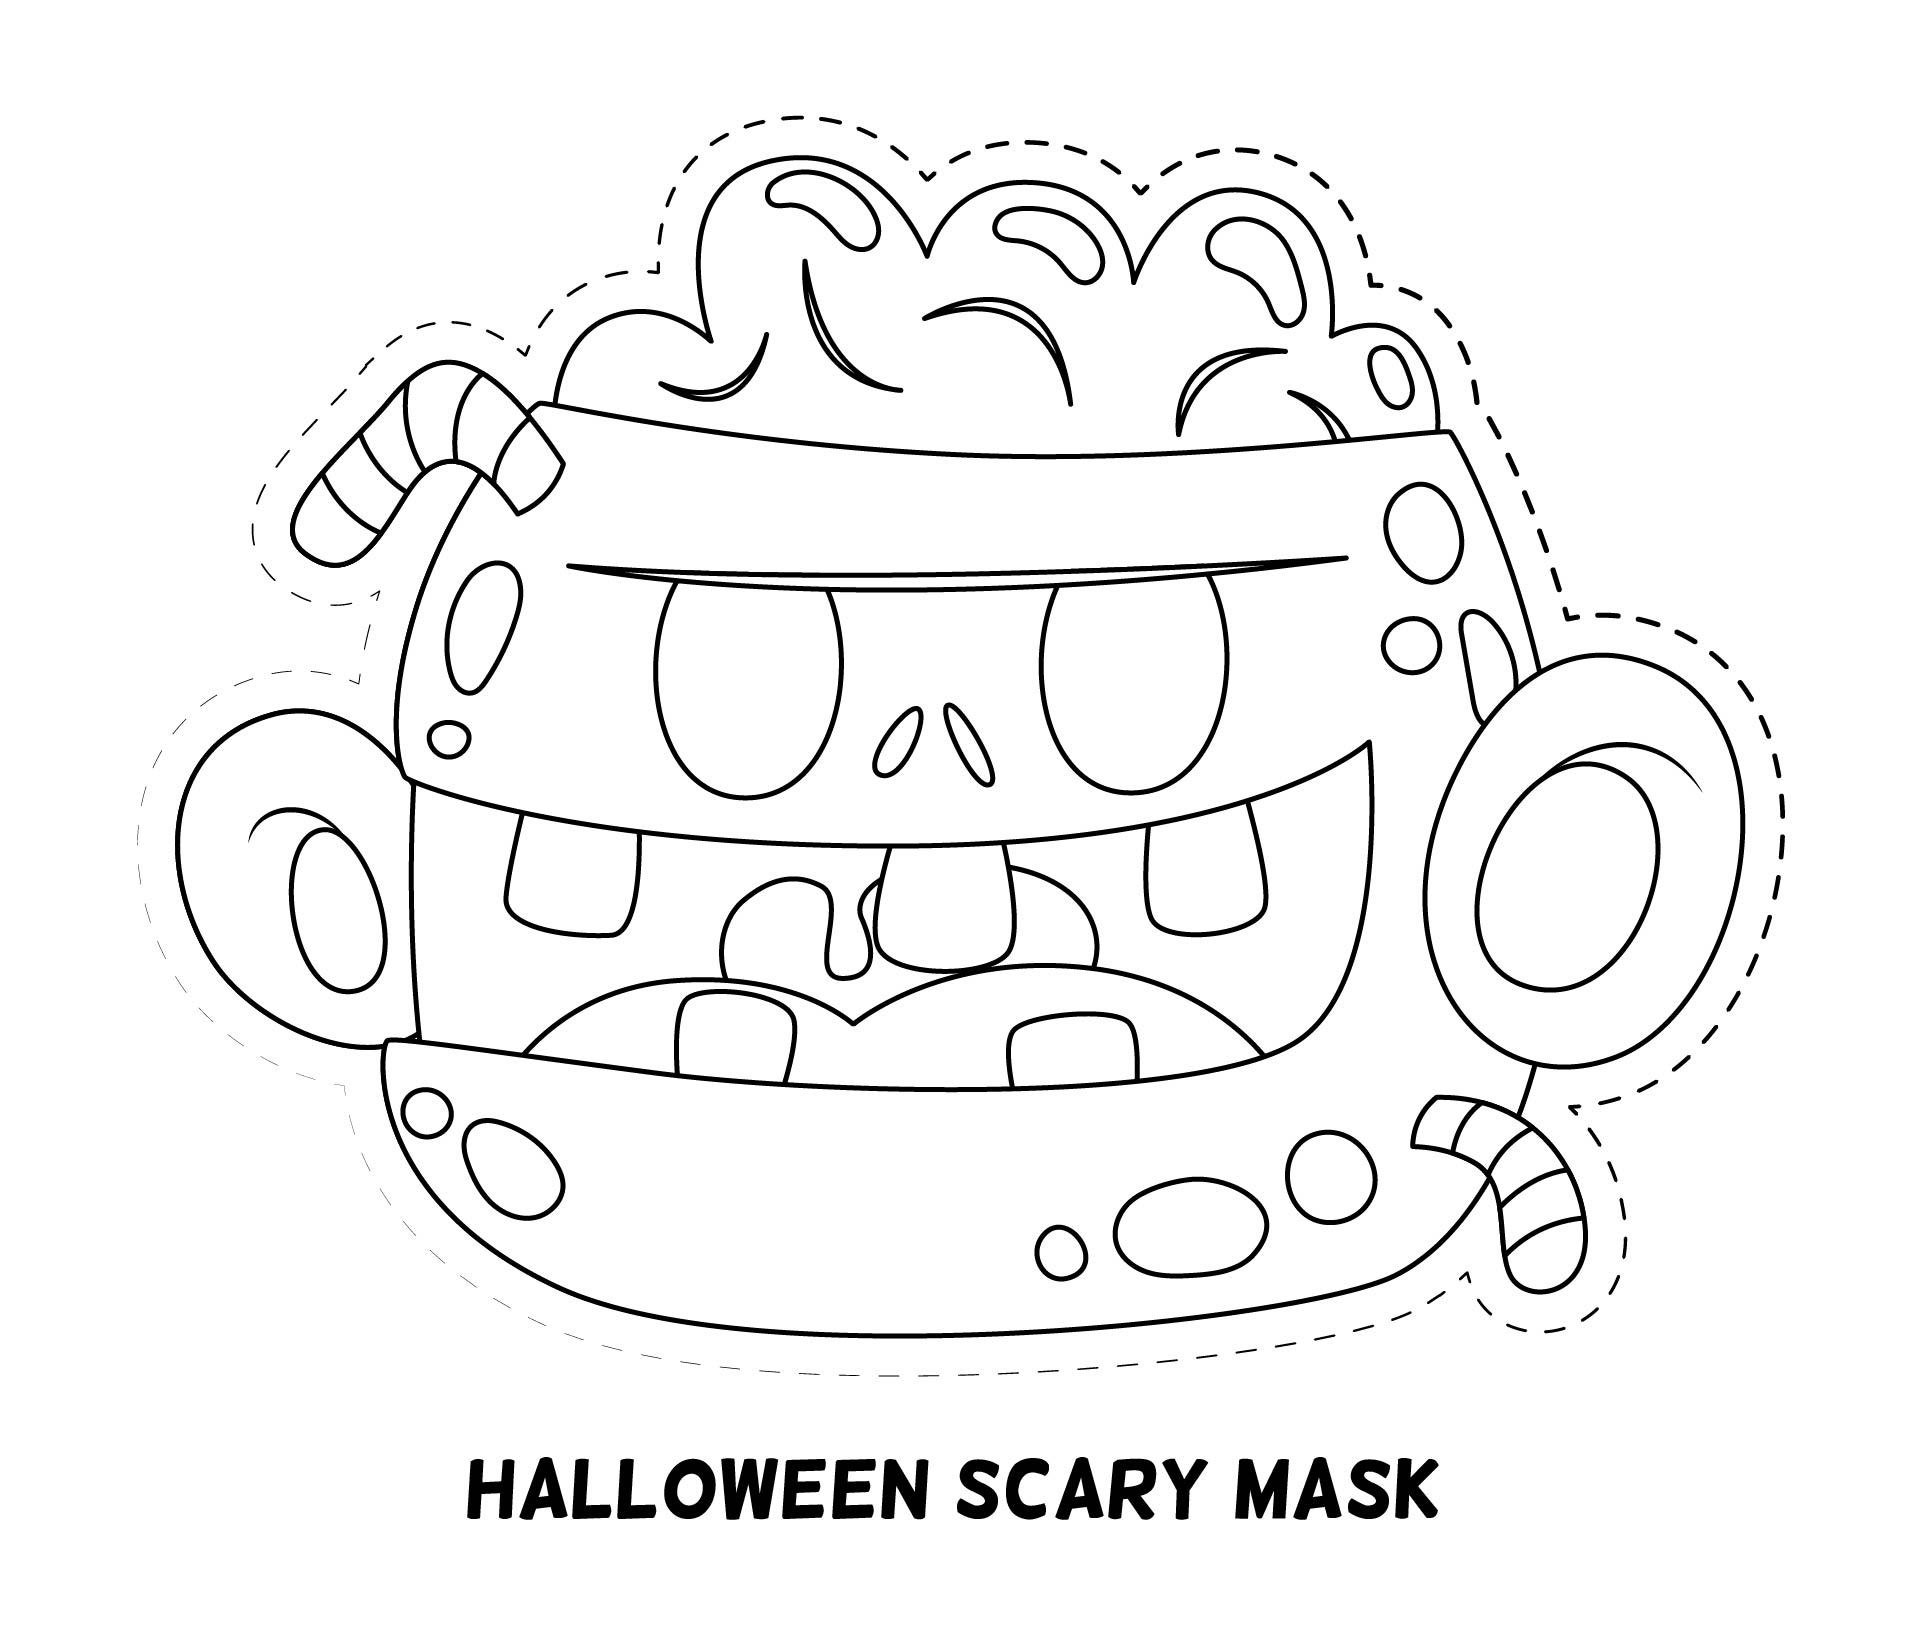 Halloween Scary Mask Coloring Page Printable